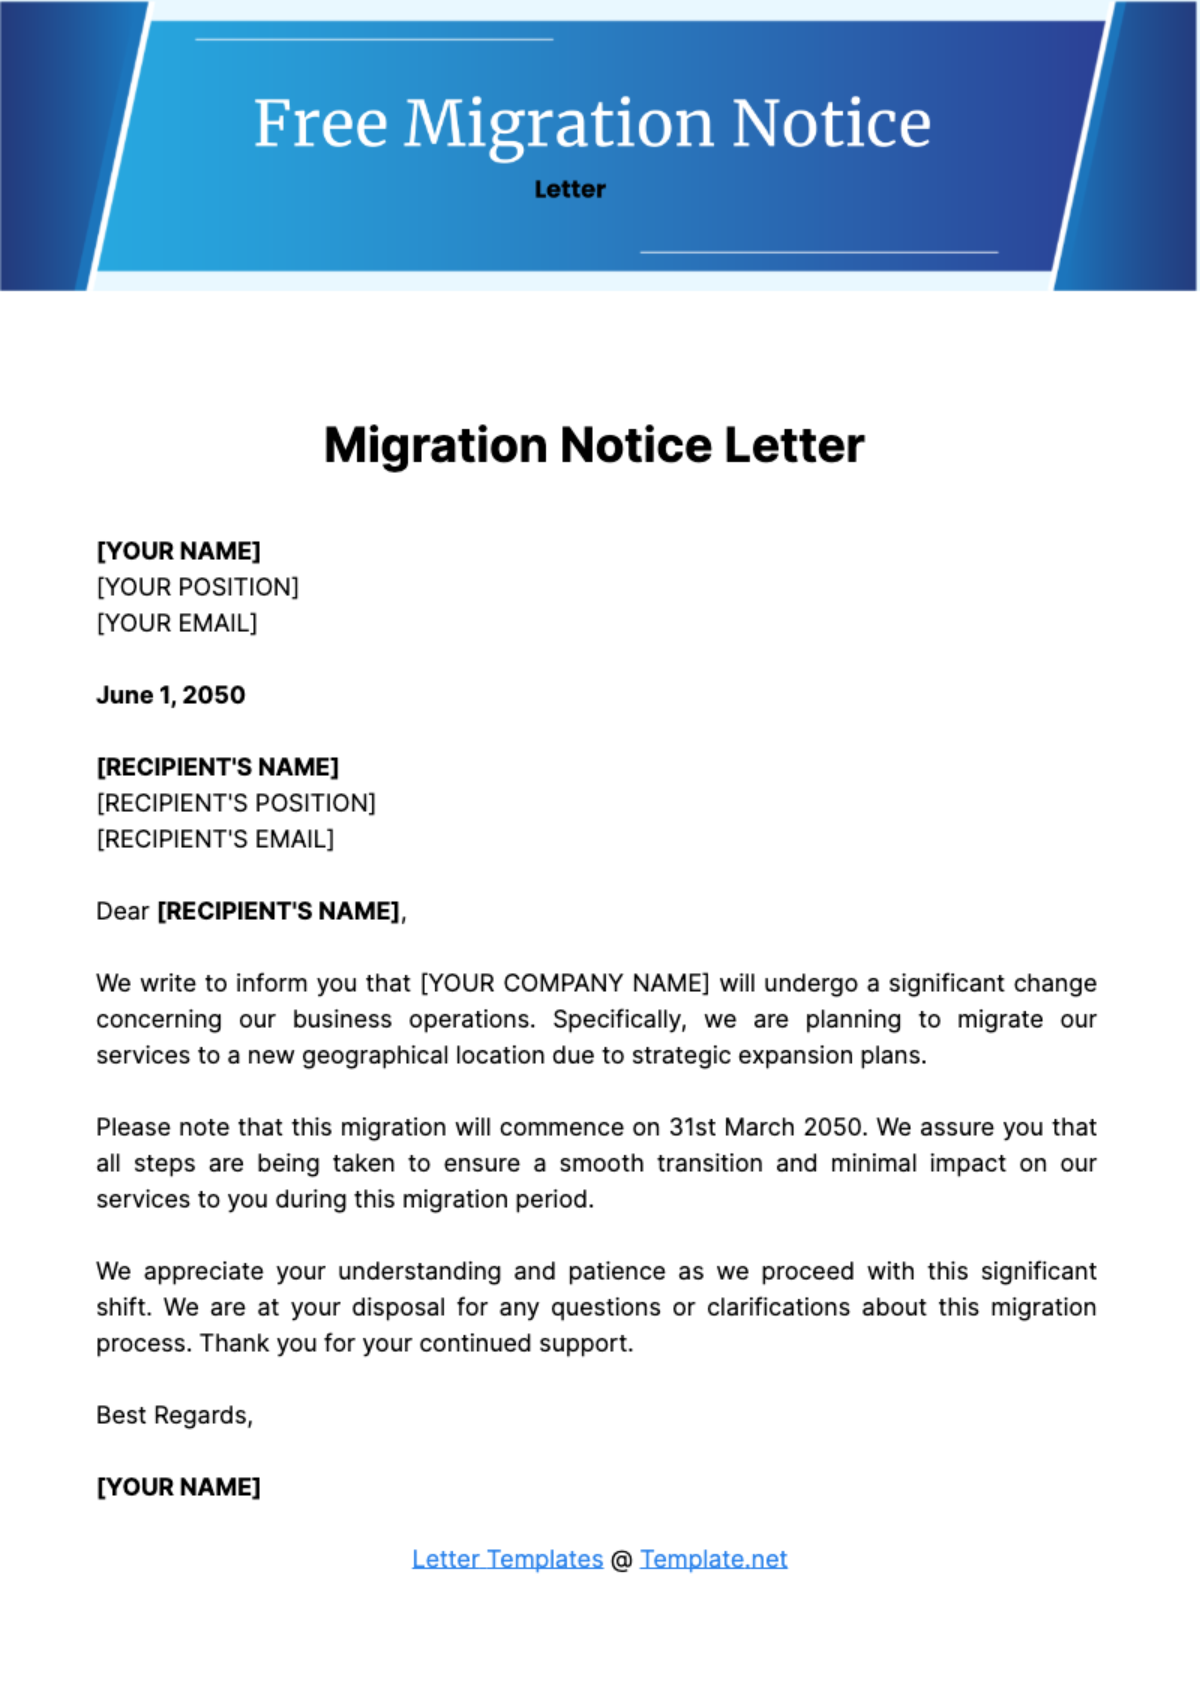 Free Migration Notice Letter Template